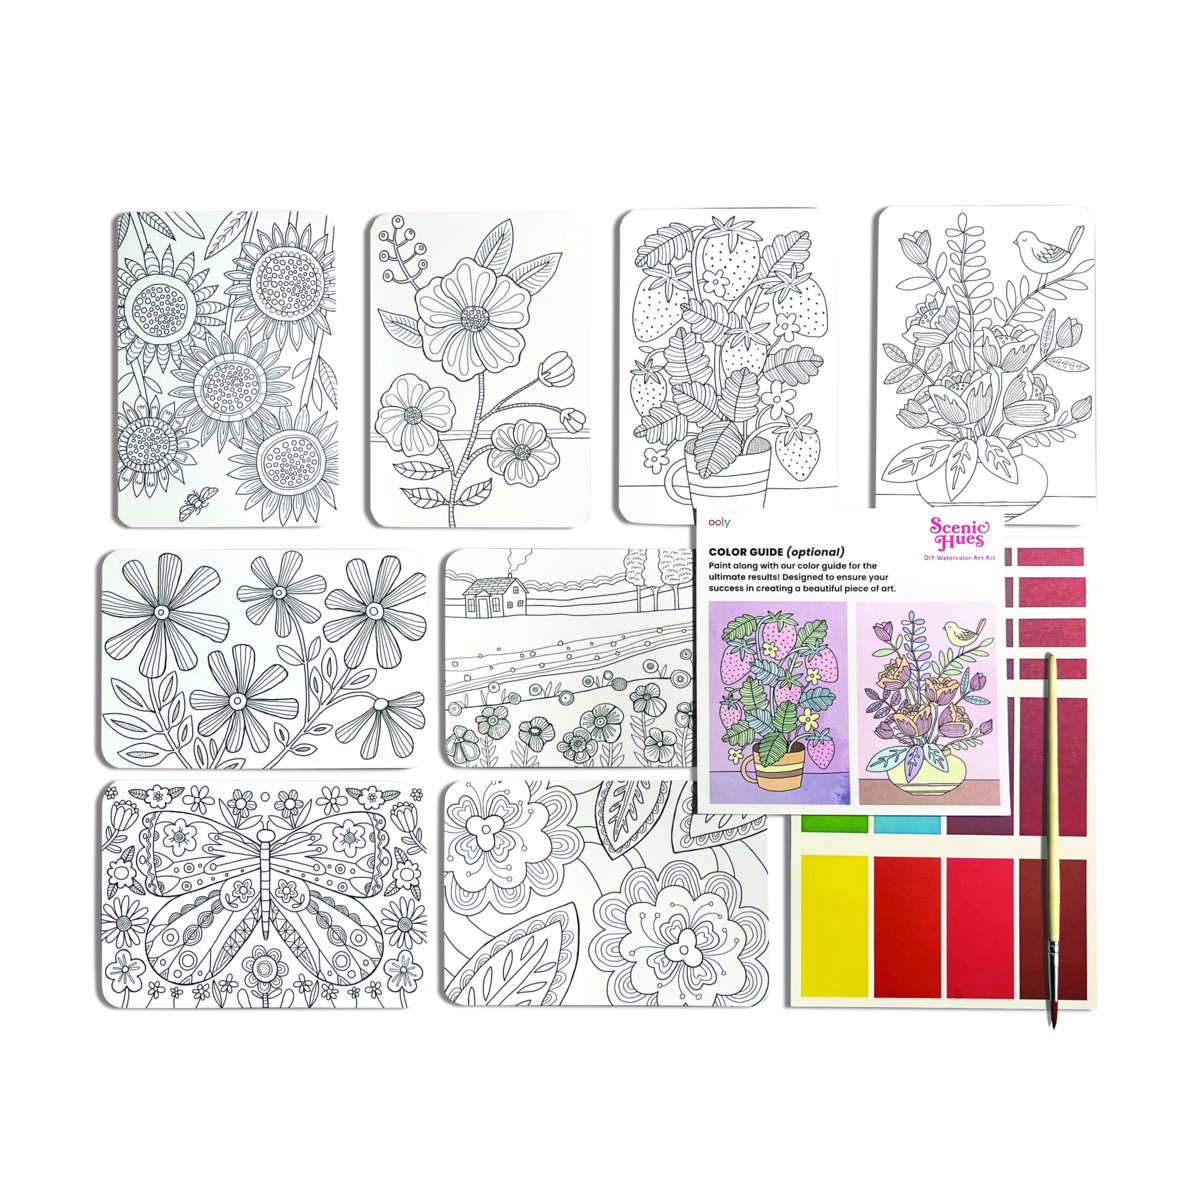 Flowers and Gardens Scenic Hues DIY watercolor art kit contents